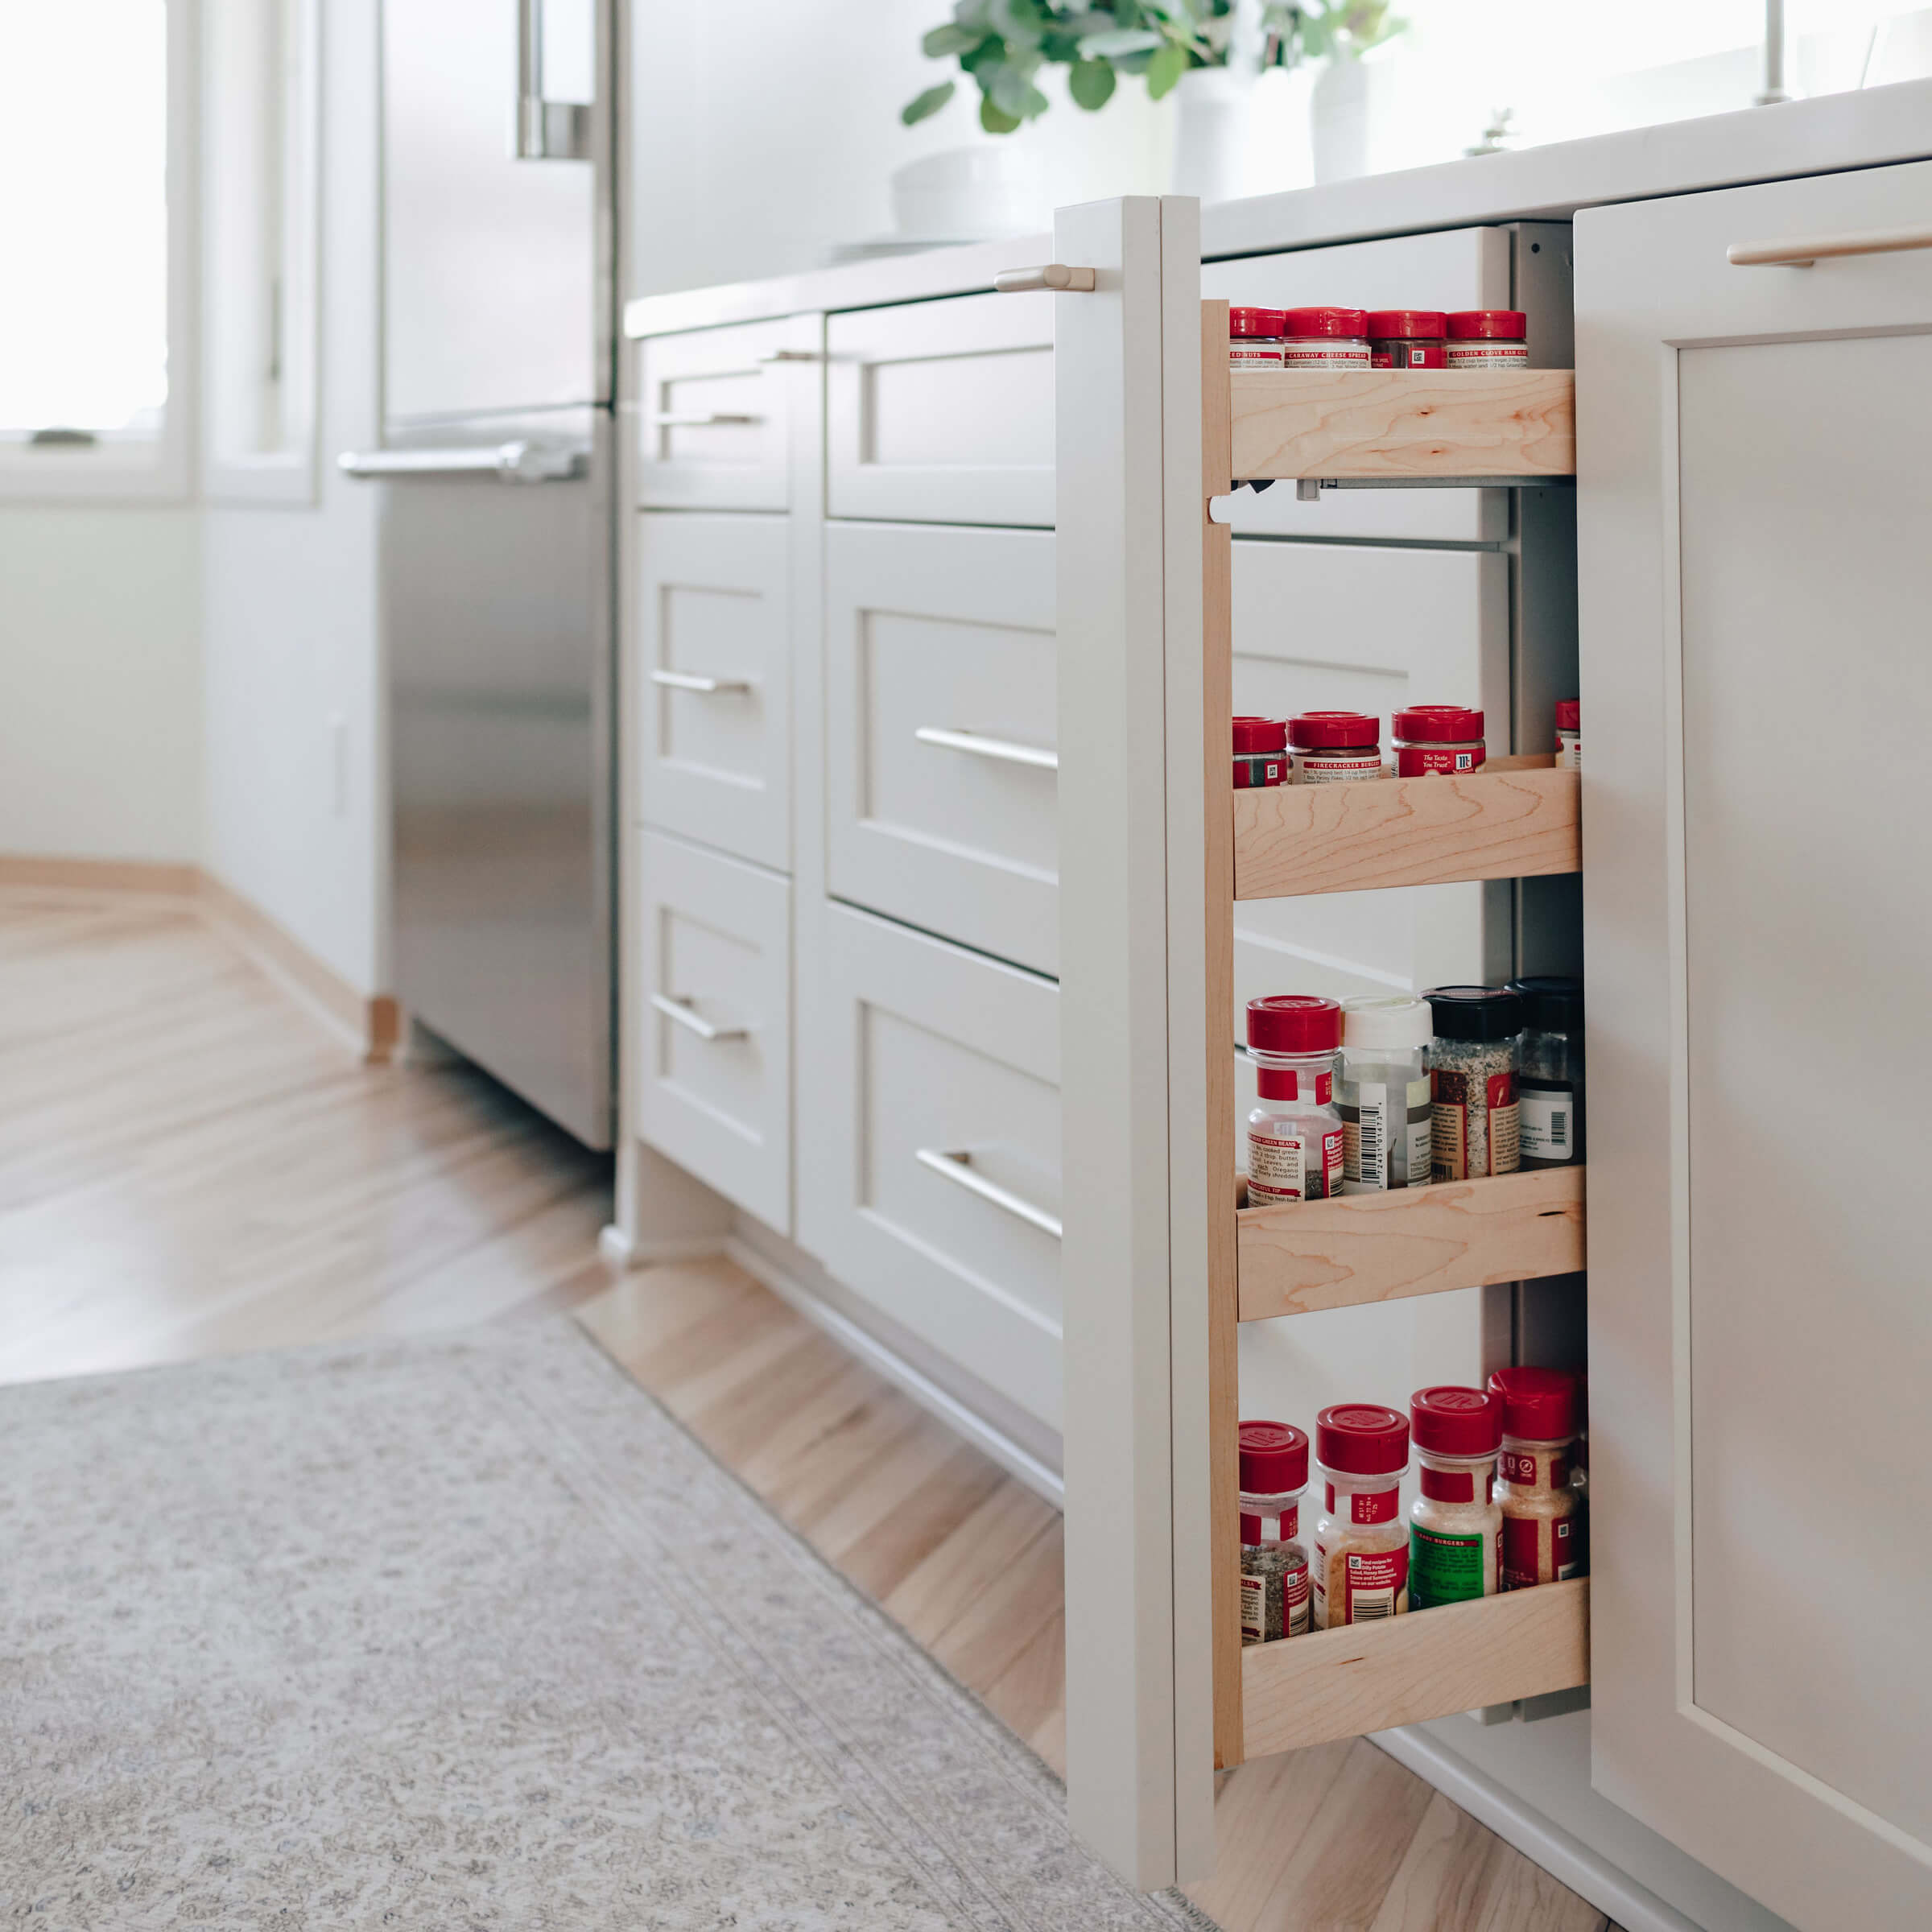 A pull-out spice rack in a thin base cabinet.